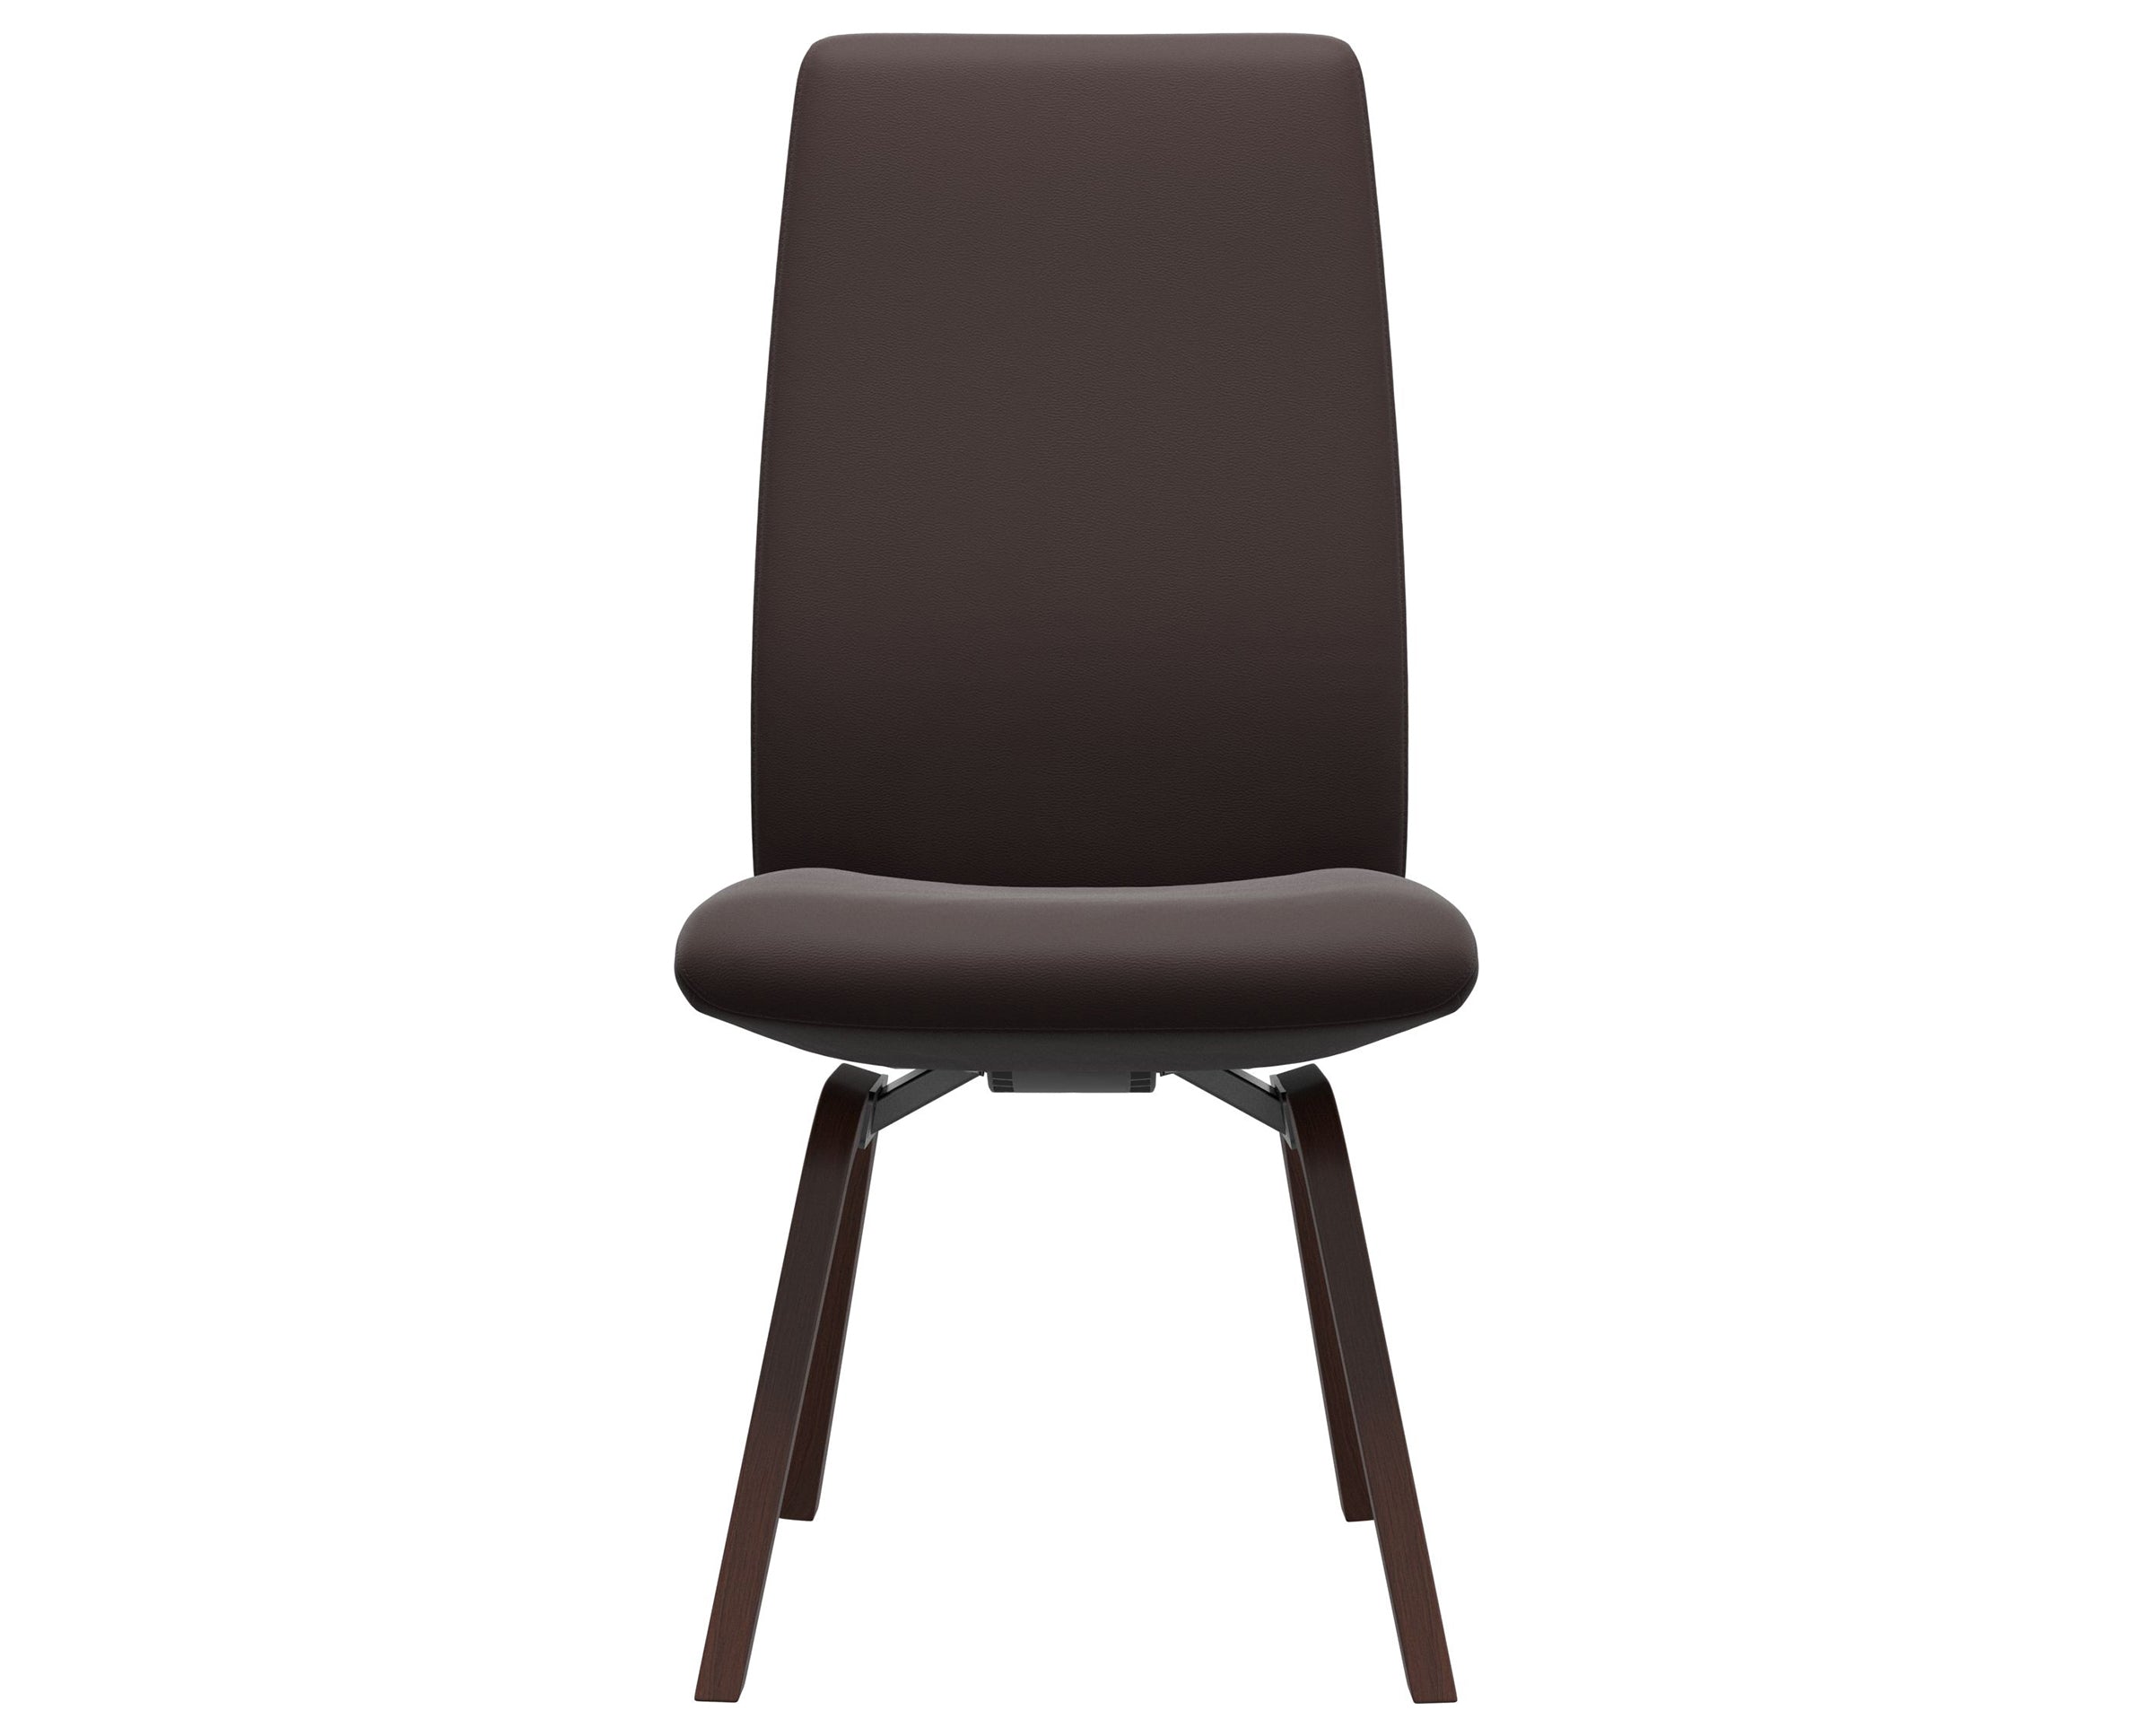 Paloma Leather Chocolate and Walnut Base | Stressless Laurel High Back D200 Dining Chair | Valley Ridge Furniture